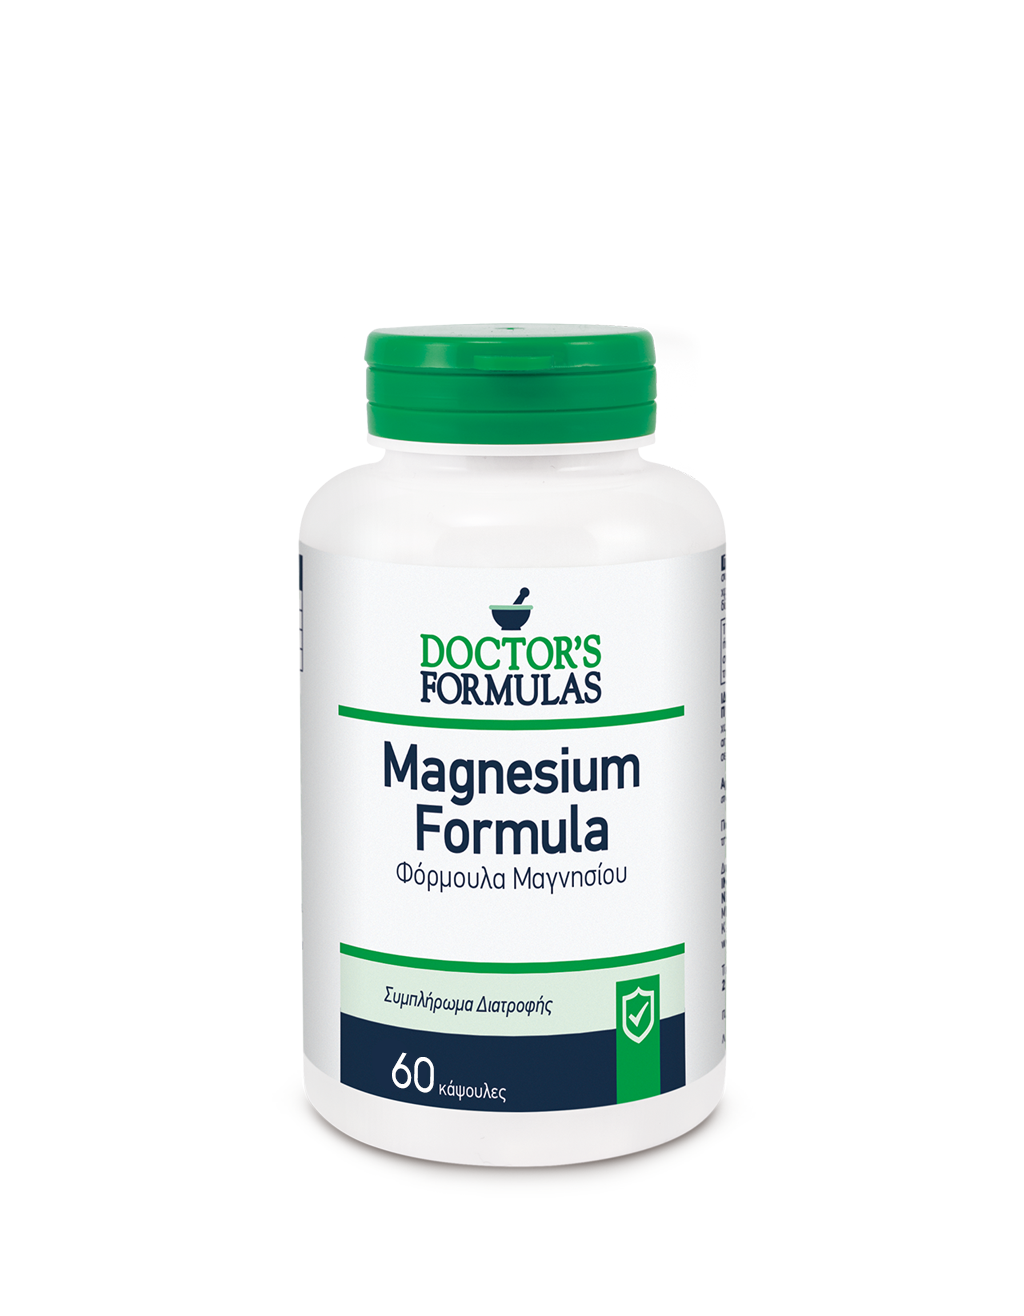 Magnesium | Formula promoting a Healthy Muscle & Nervous System